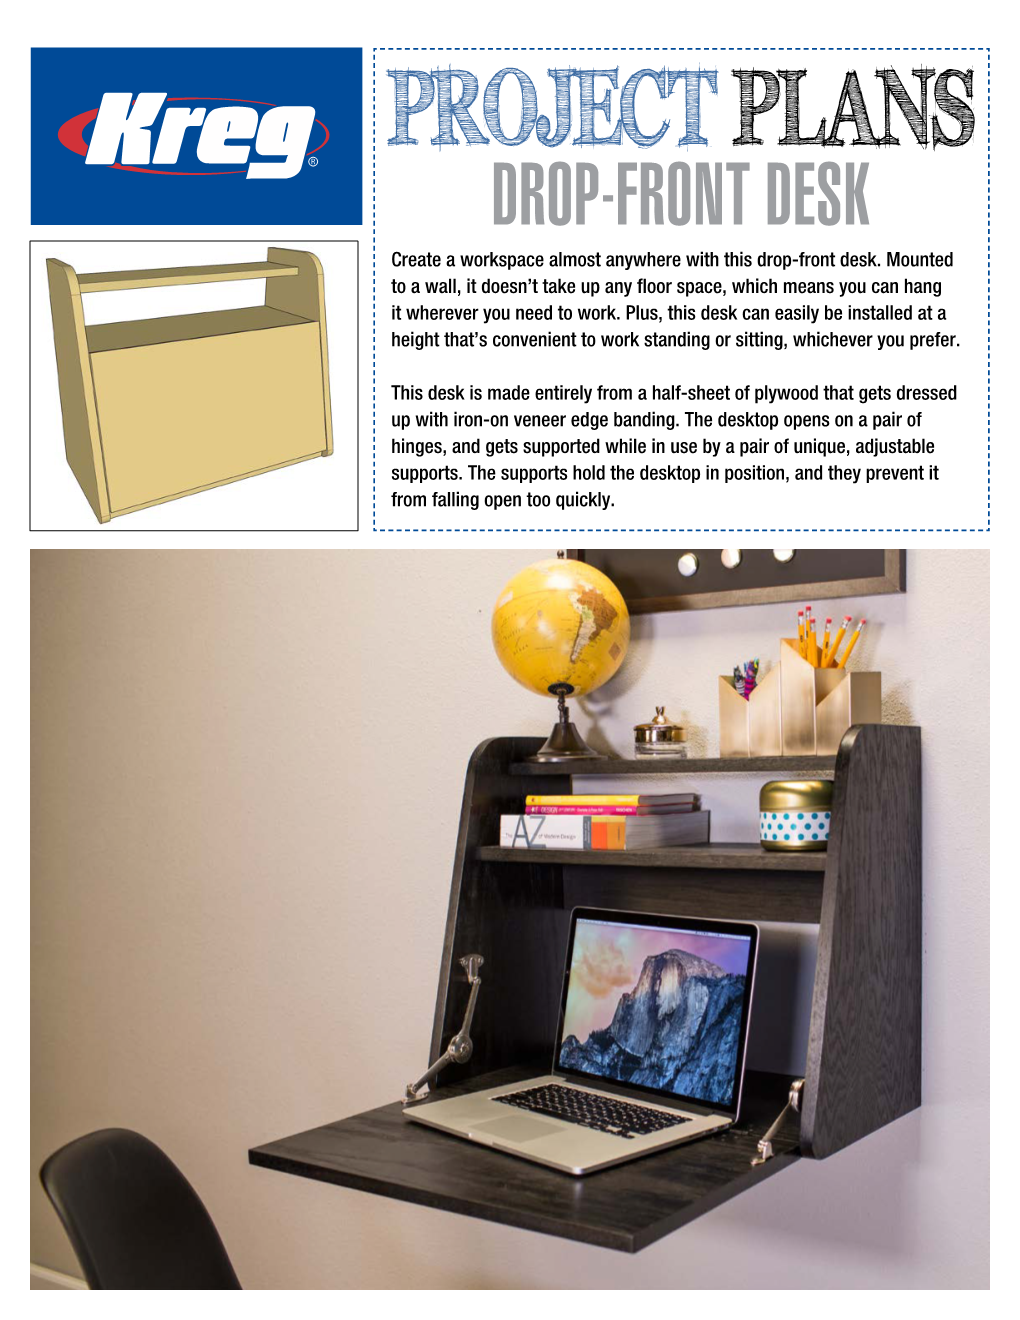 PROJECT PLANS DROP-FRONT DESK Logo on White Or Light Shade When Printing Grayscalecreate a Workspace Almost Anywhere with This Drop-Front Desk